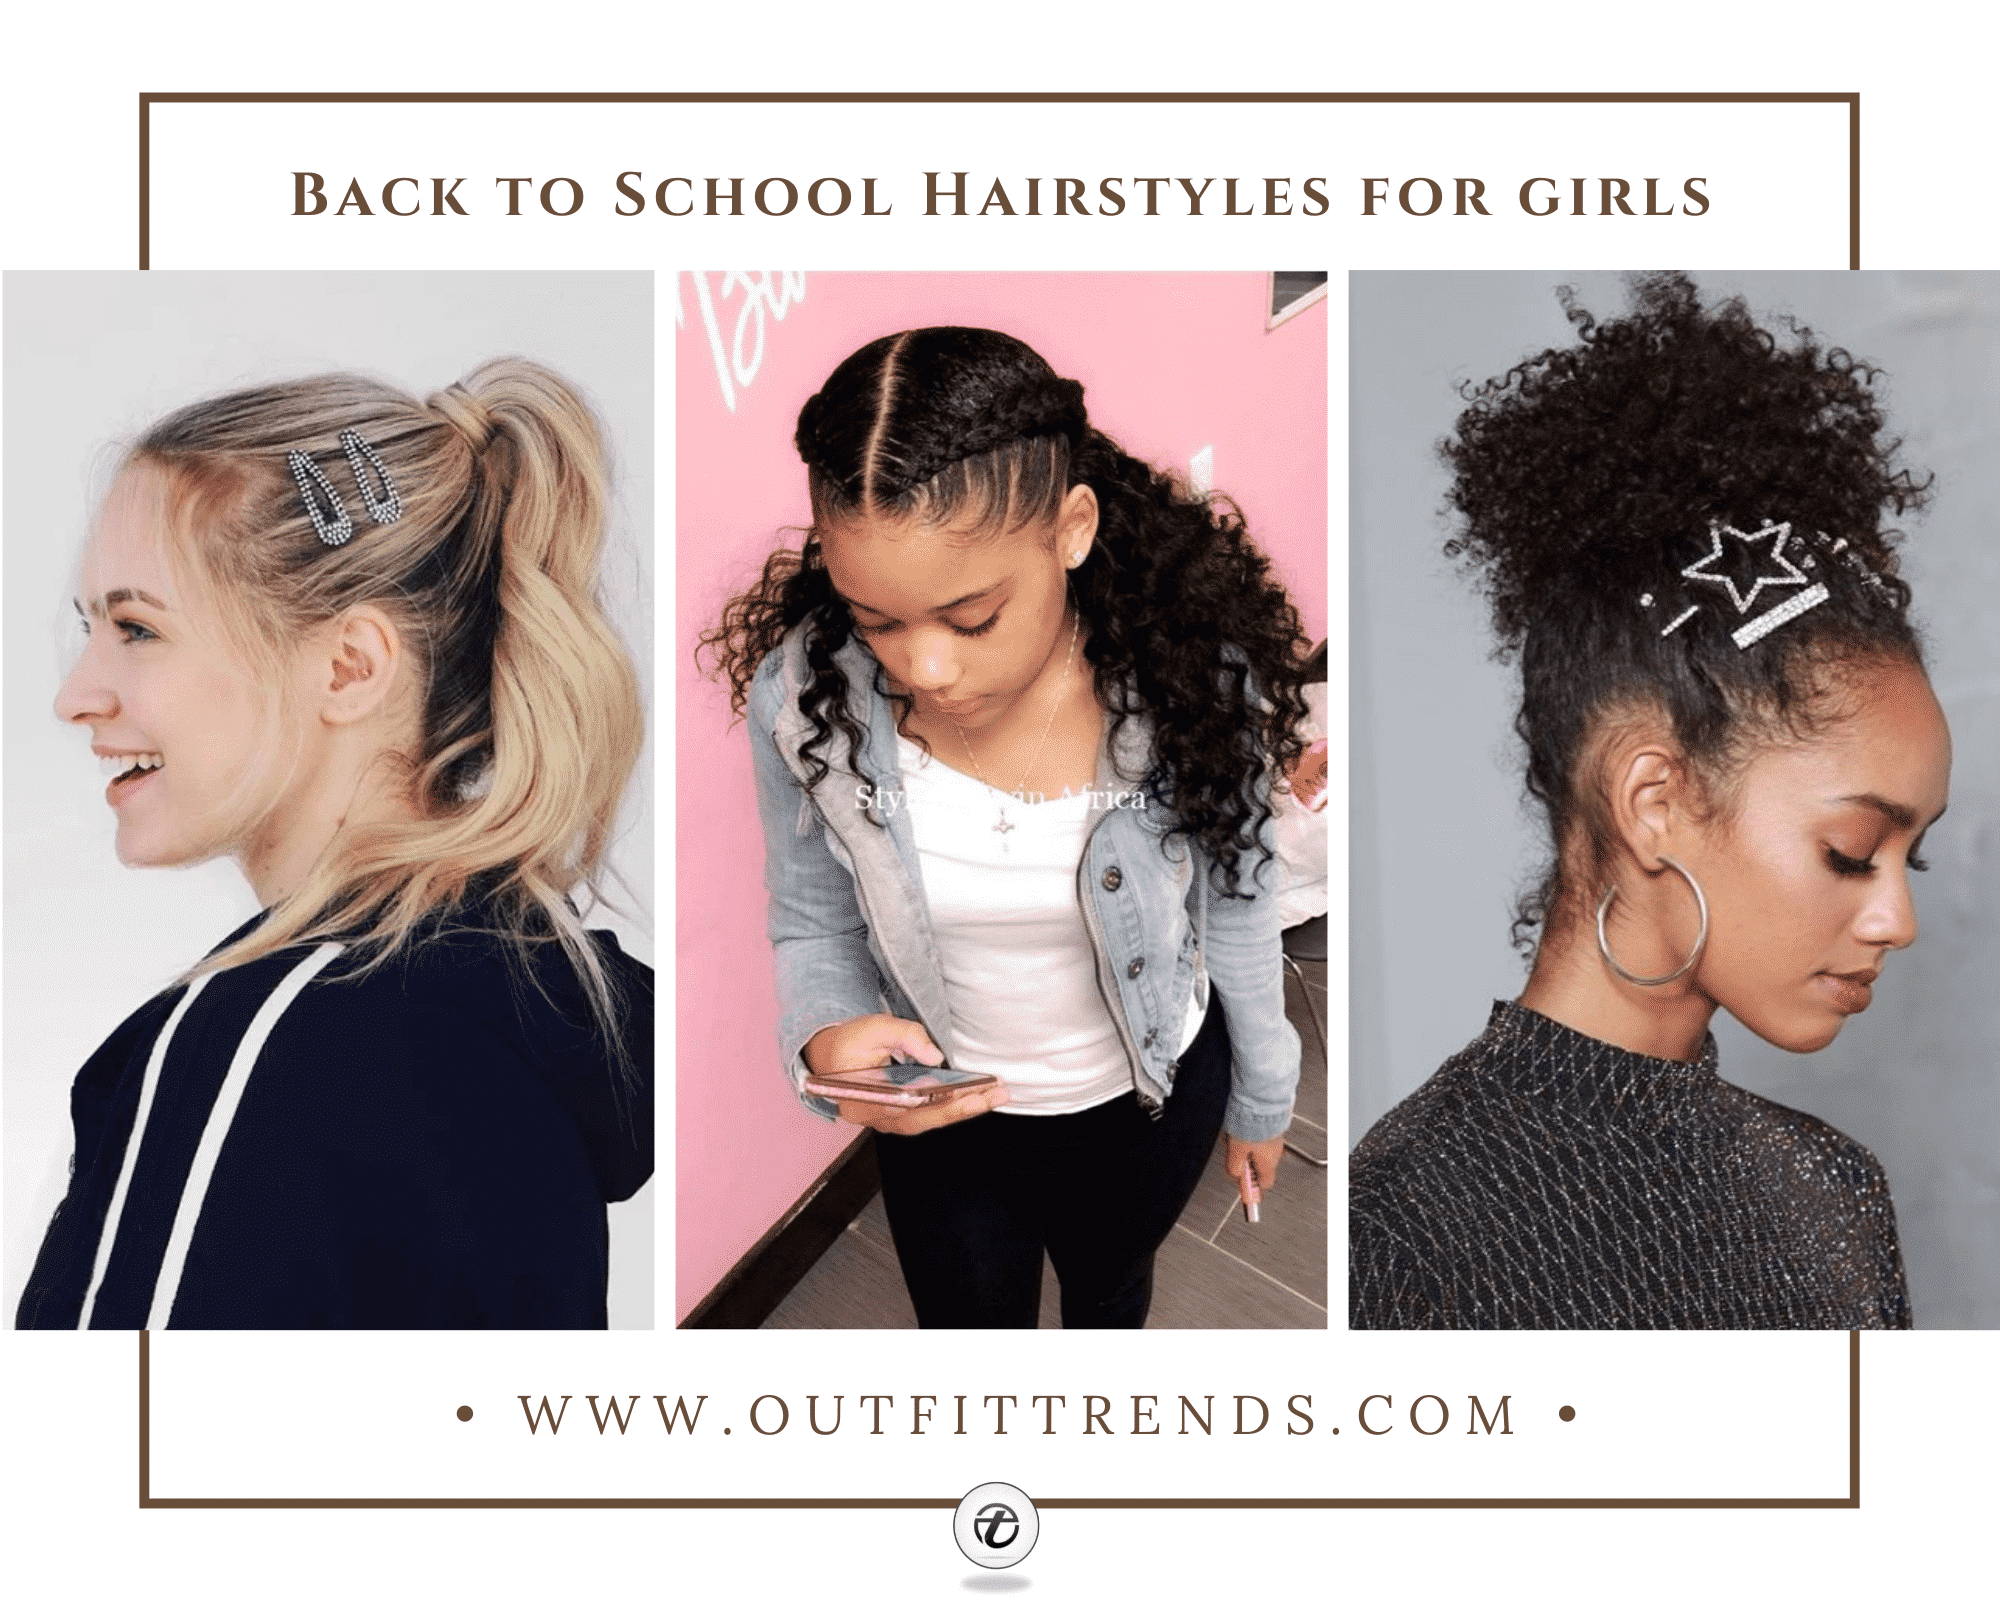 79 5-Minute Hairstyles for School for All Ages and Hair Lengths